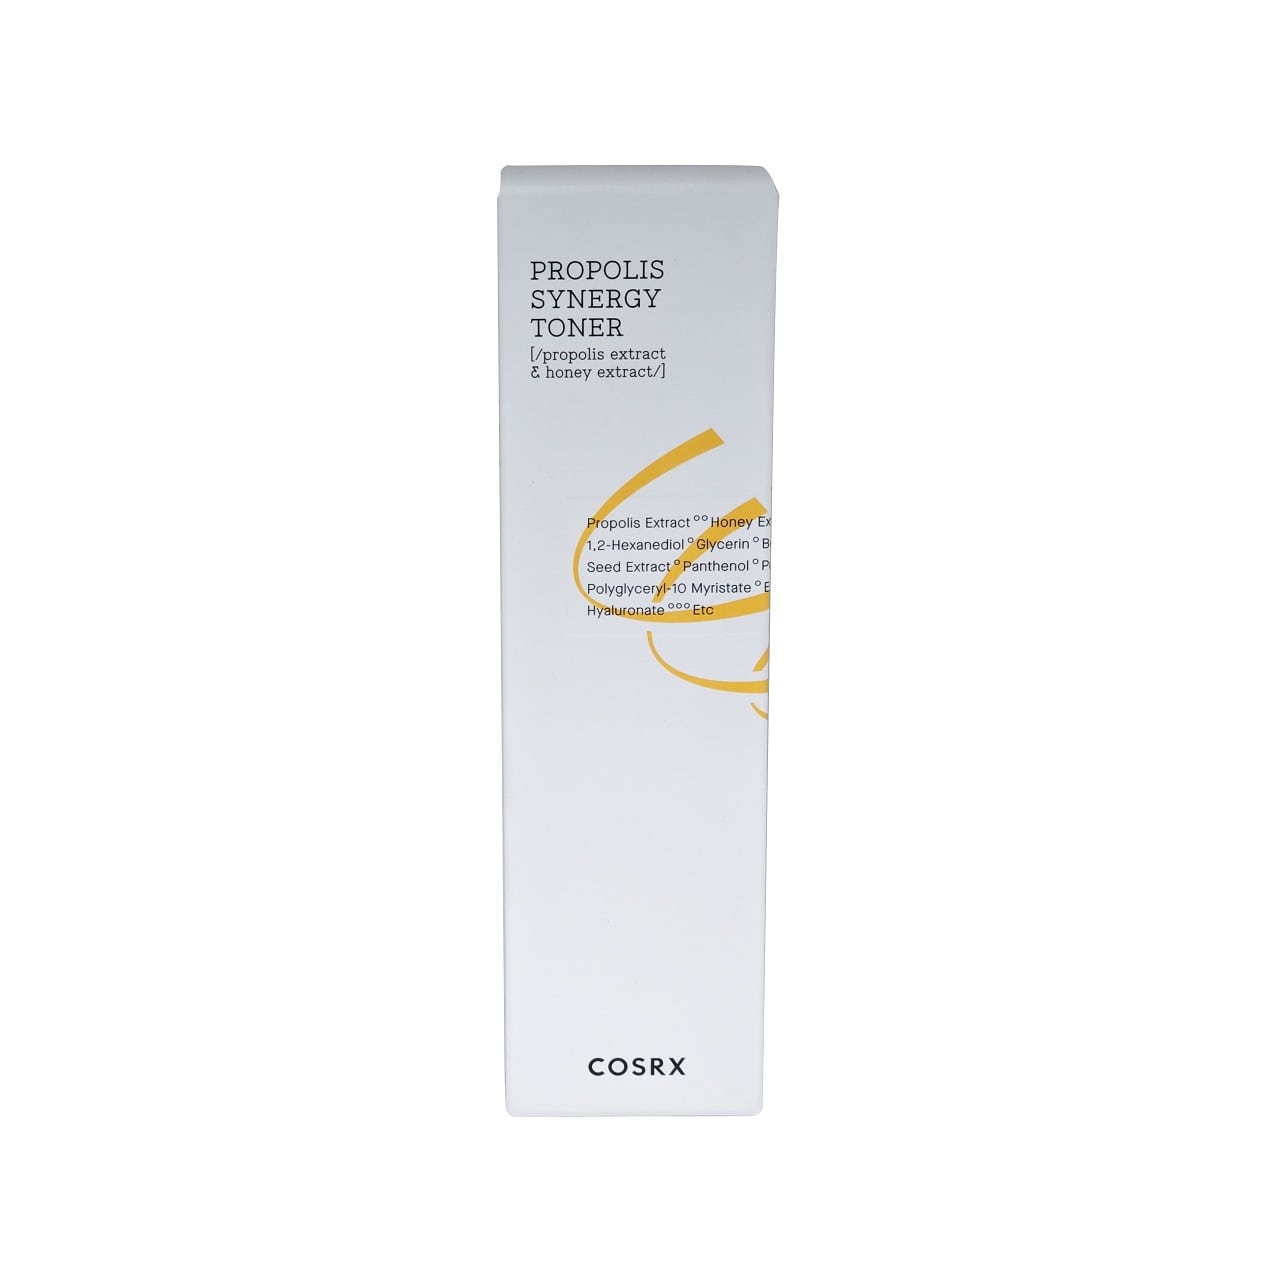 Product label for COSRX Full Fit Propolis Synergy Toner